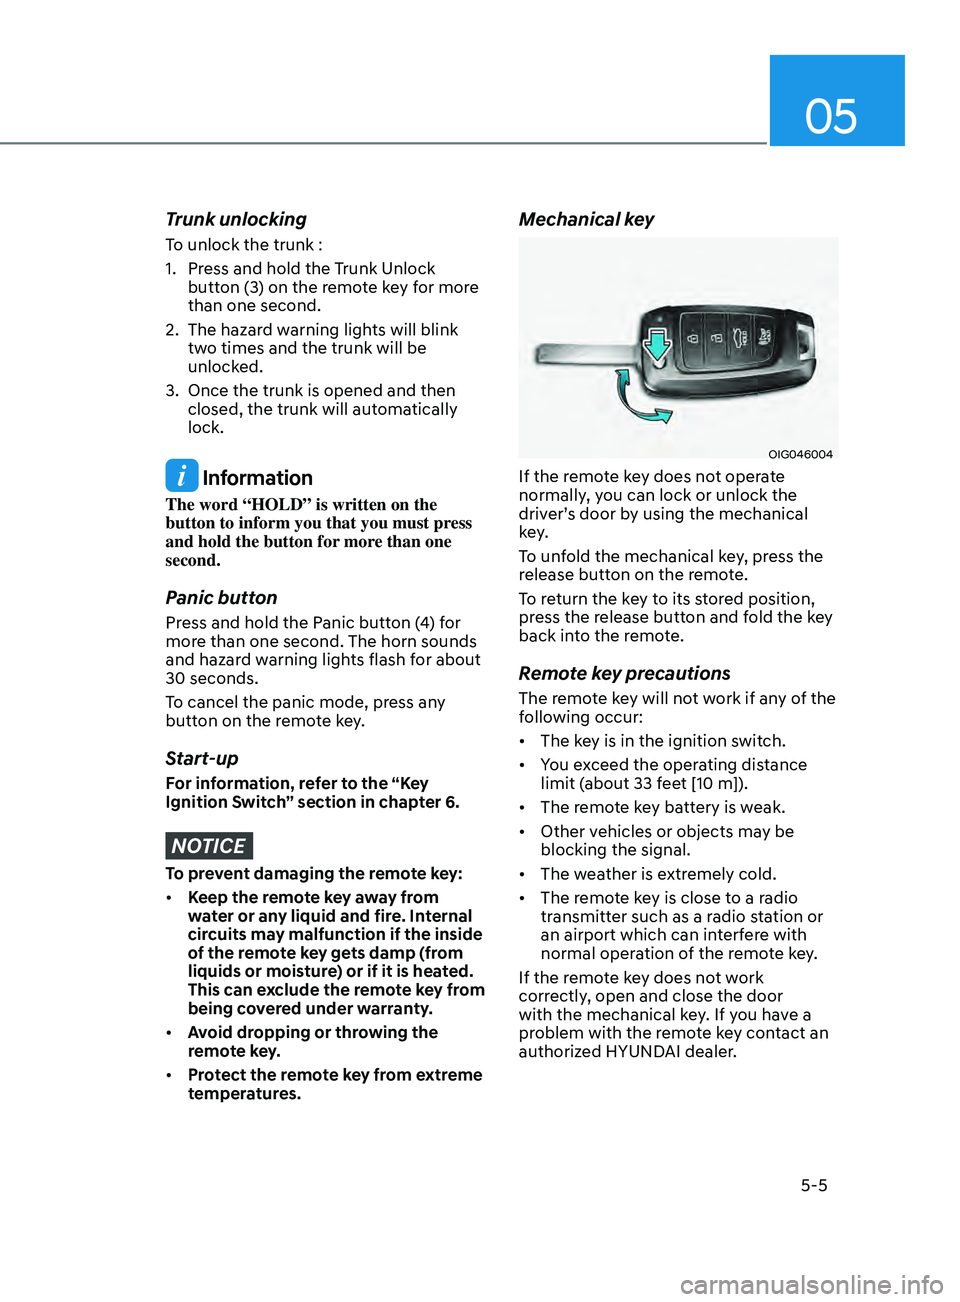 HYUNDAI ELANTRA SEL 2021  Owners Manual 05
5-5
Trunk unlocking
To unlock the trunk :
1.
 Press and hold the T
runk Unlock 
button (3) on the remote key for more 
than one second.
2.
 The hazard w

arning lights will blink 
two times and the